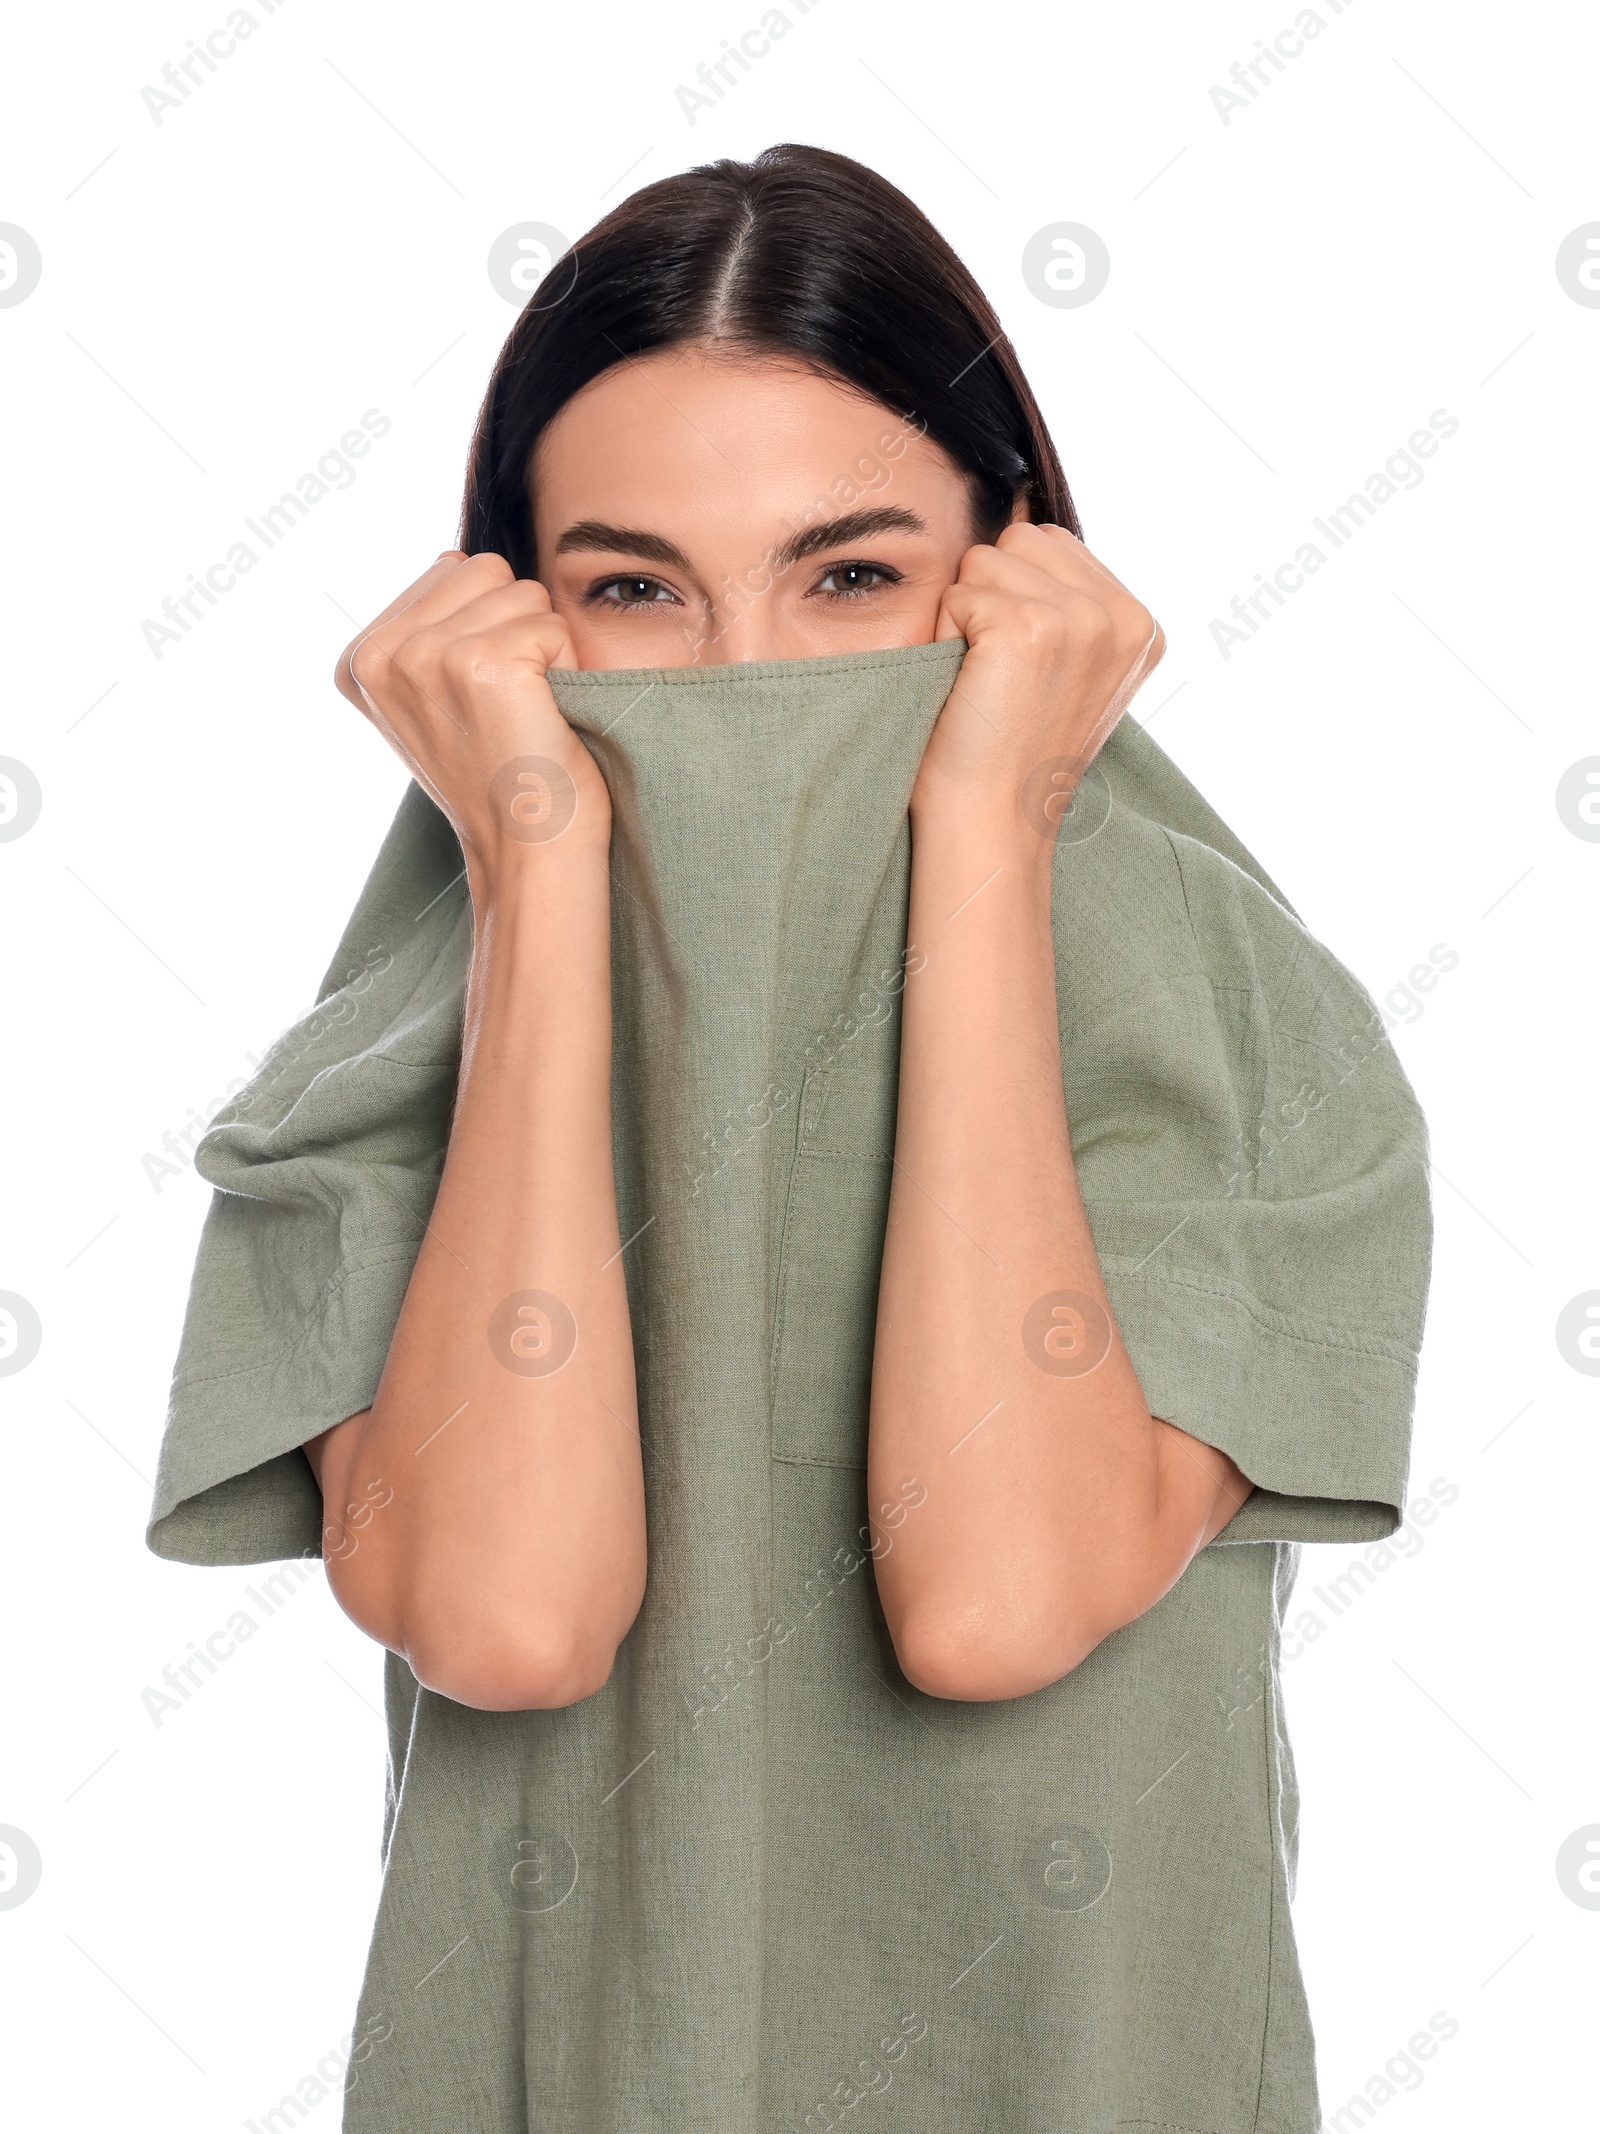 Photo of Embarrassed young woman covering face with shirt on white background